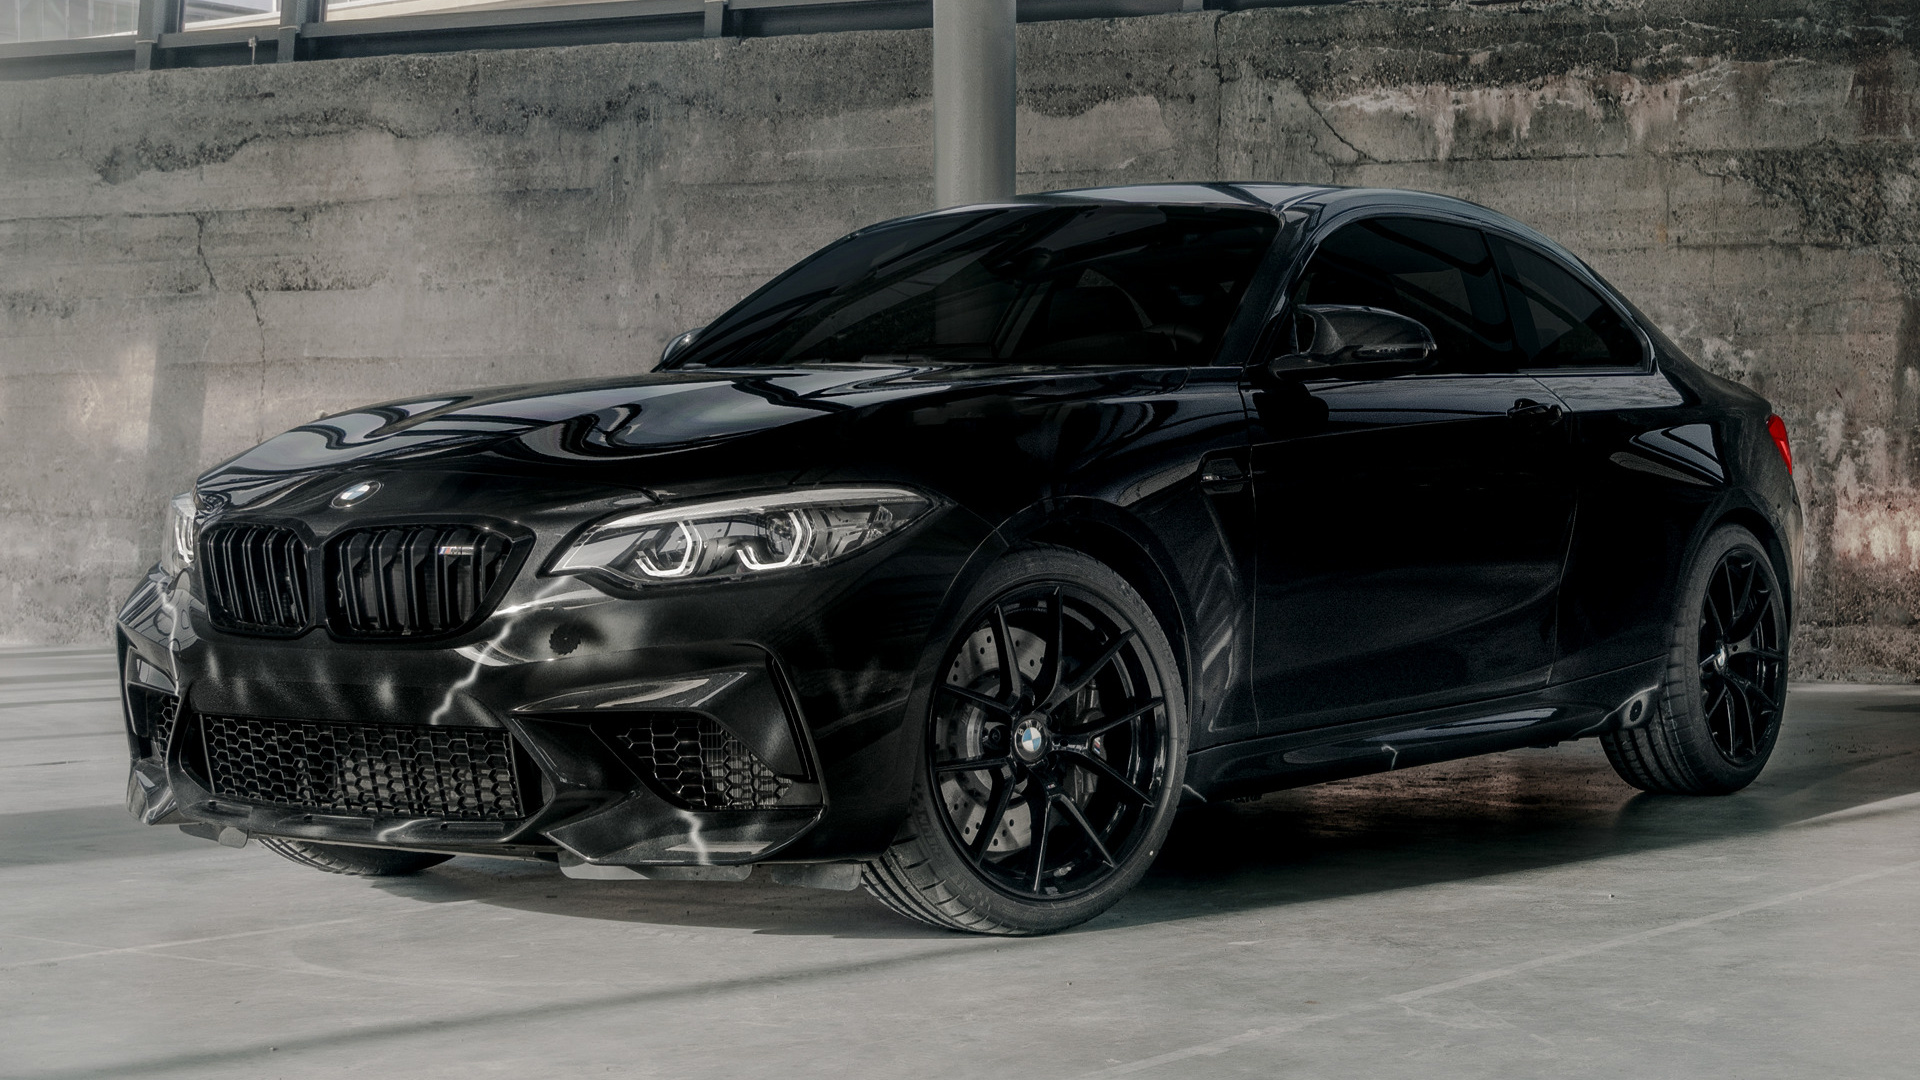 bmw, vehicles, bmw m2 coupe, bmw m2 coupe edition designed by futura 2000